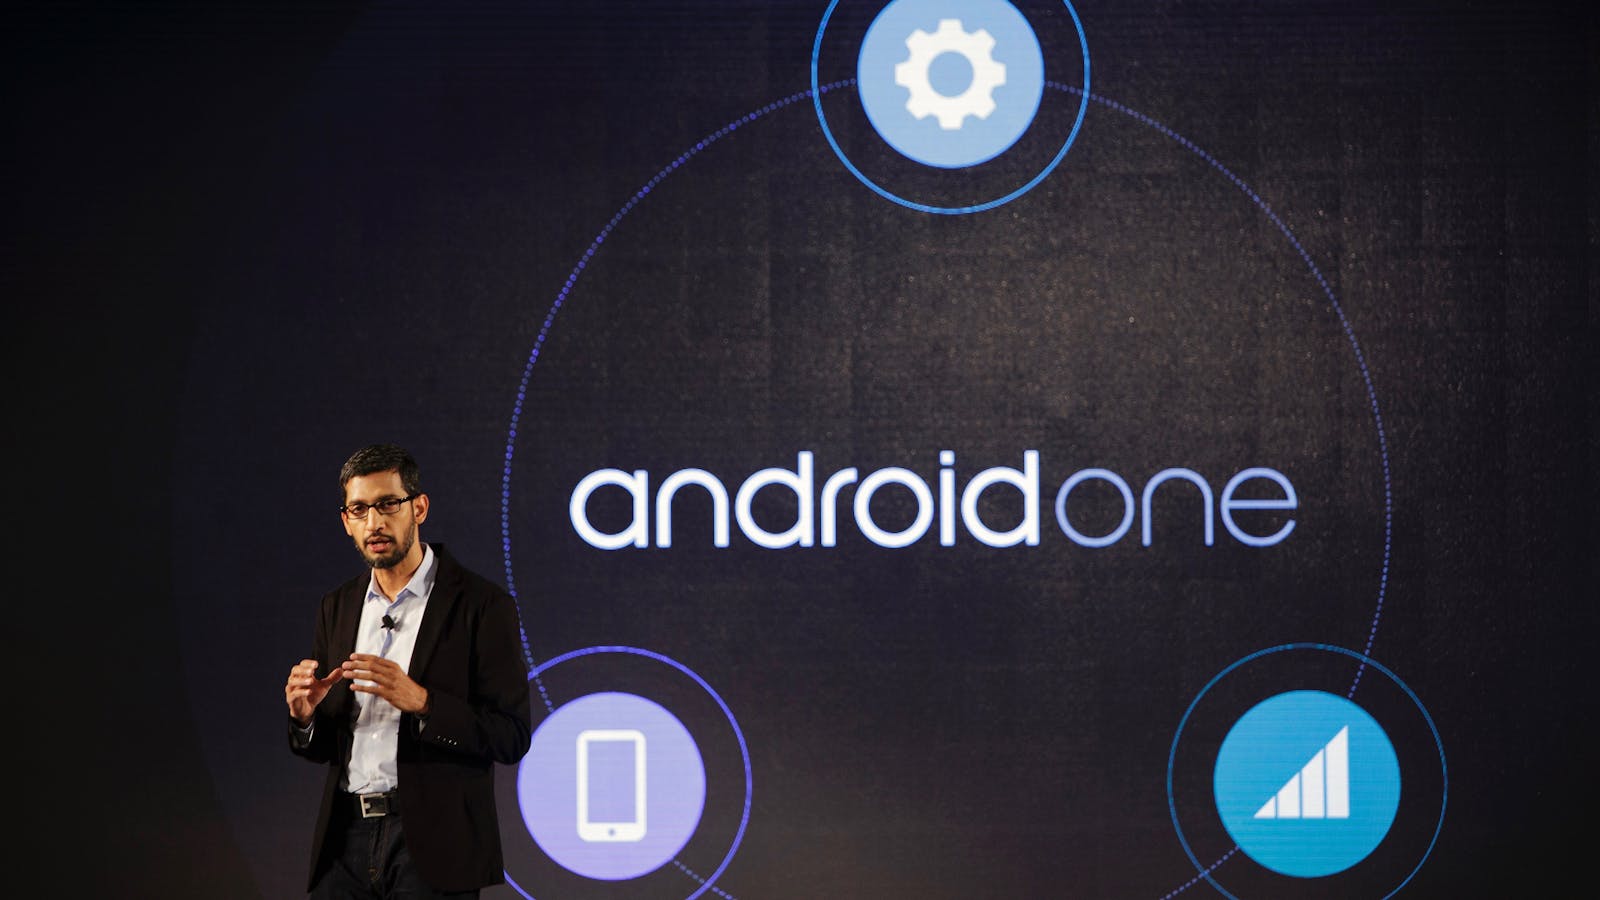 Google CEO Sundar Pichai launching Android One in India in 2014. Photo by Bloomberg.